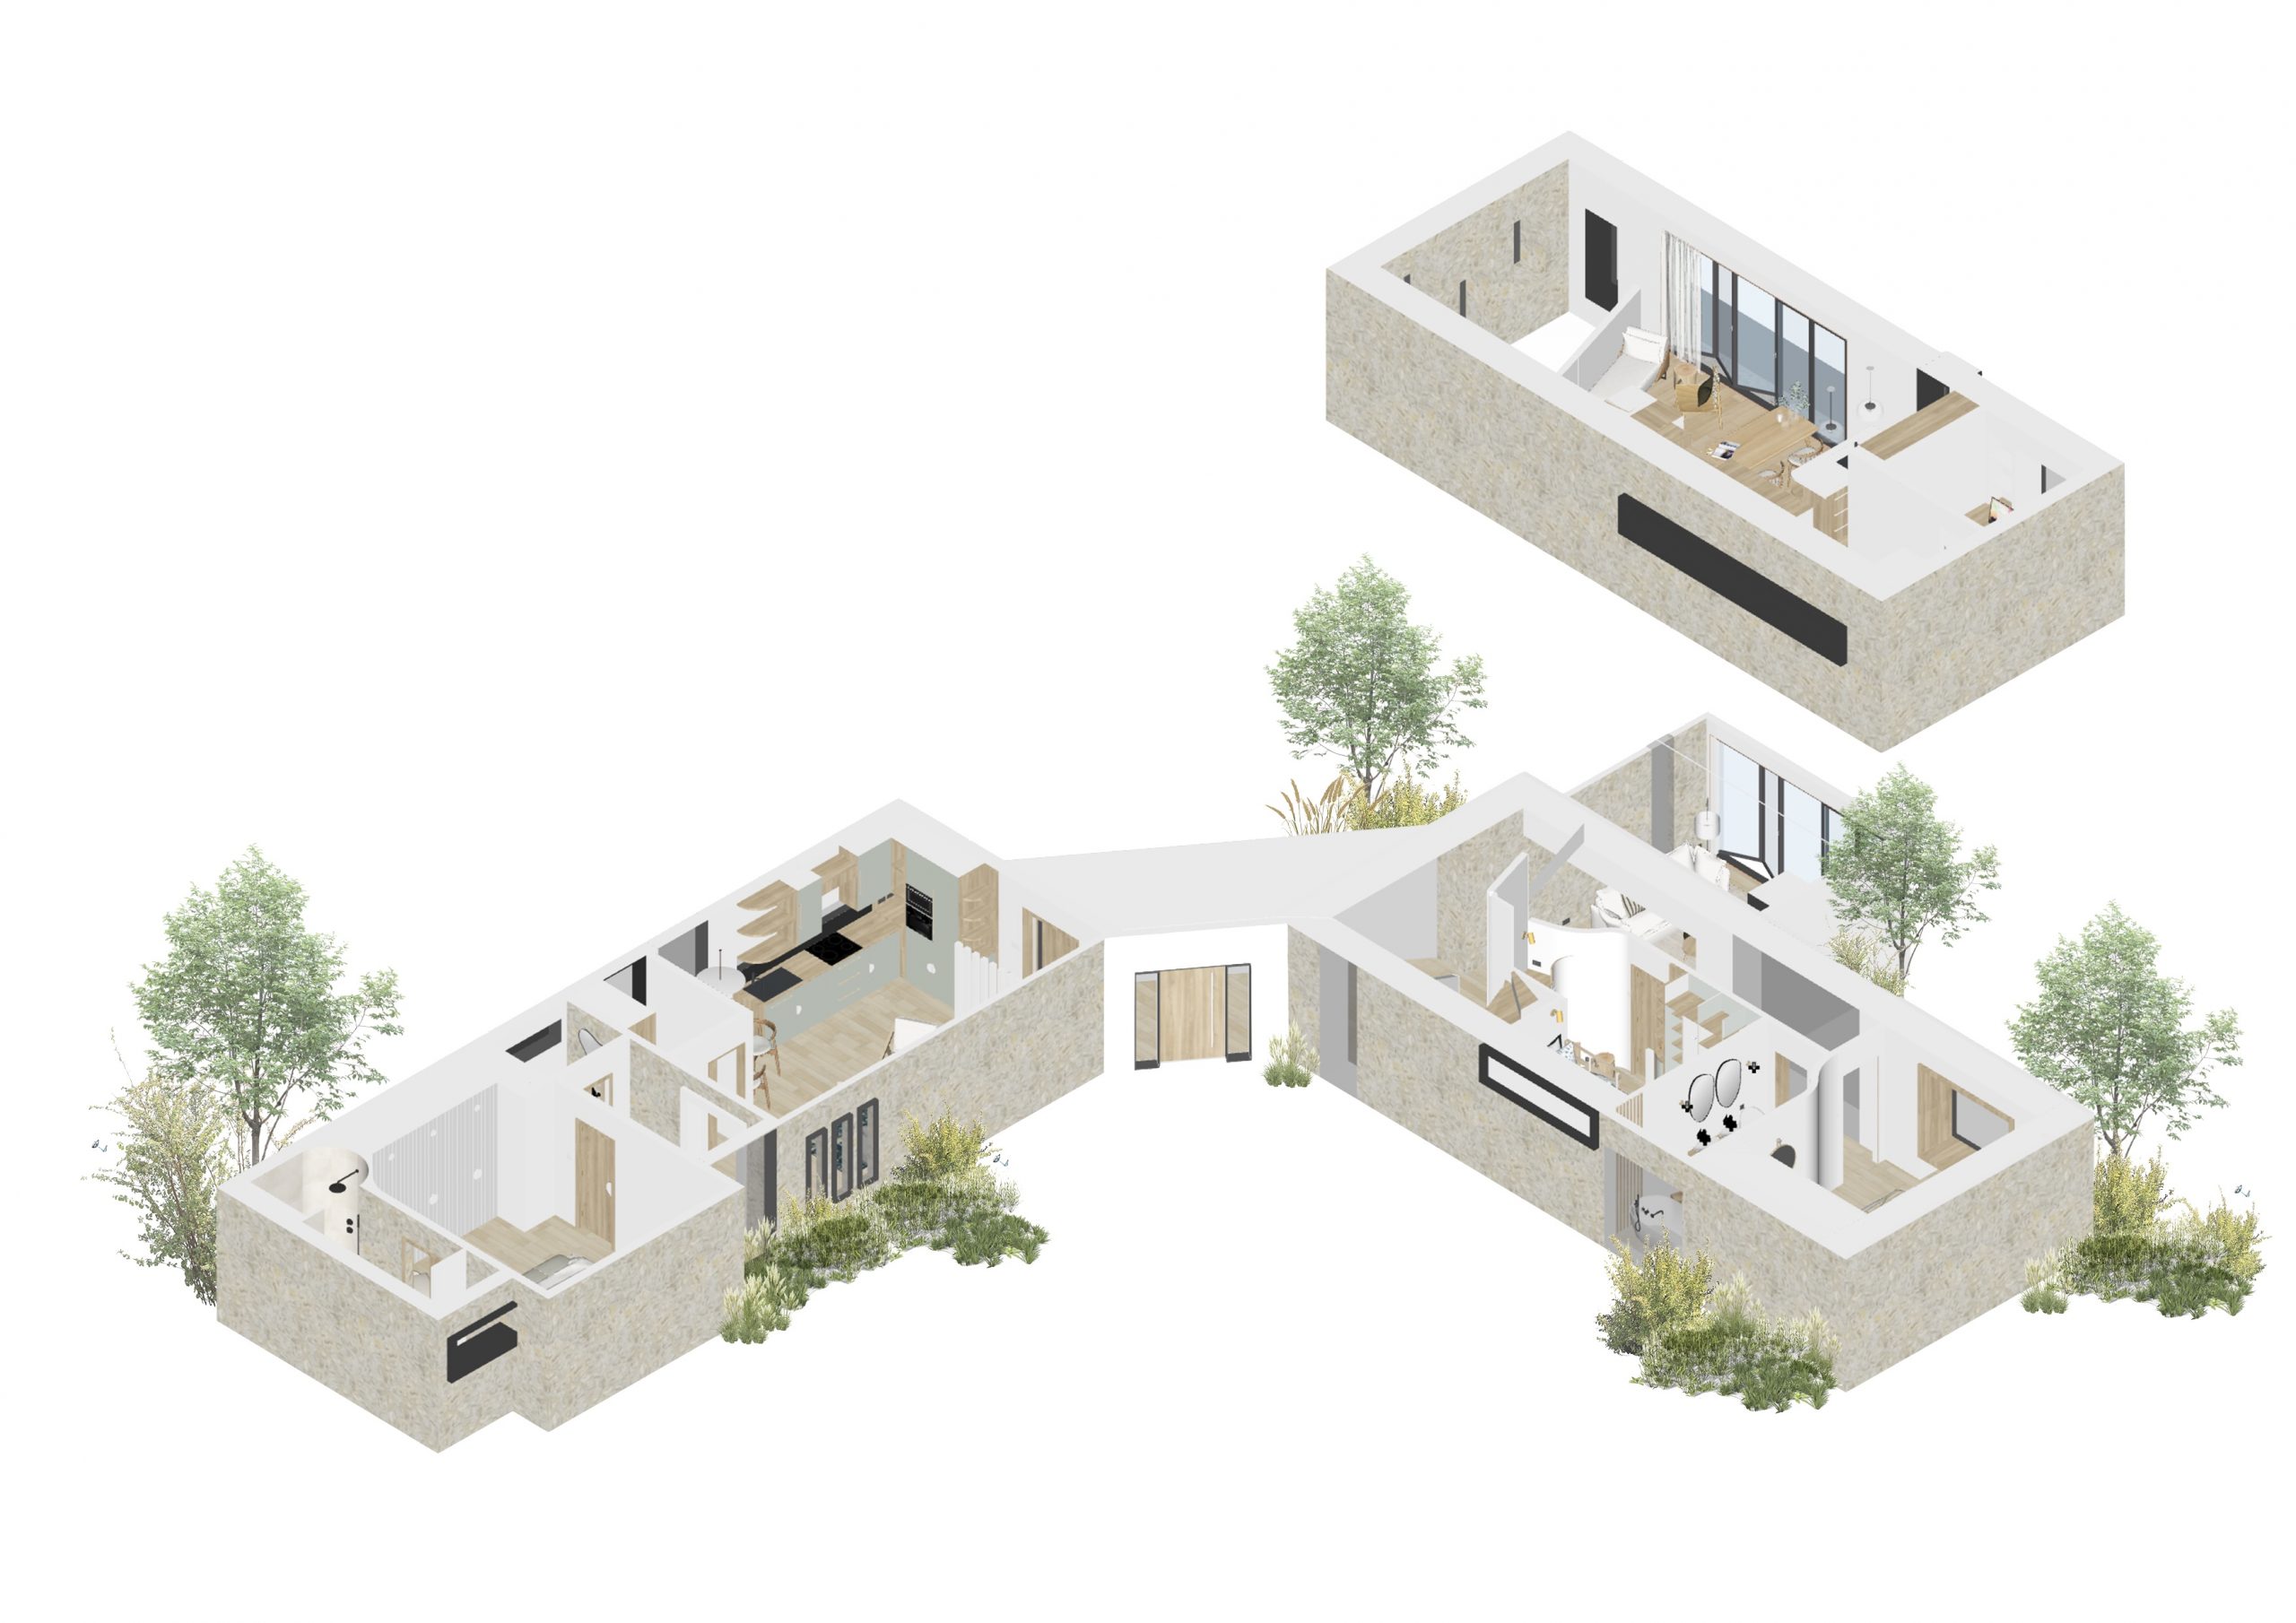 An axo illustration of a multi-generational residential project.